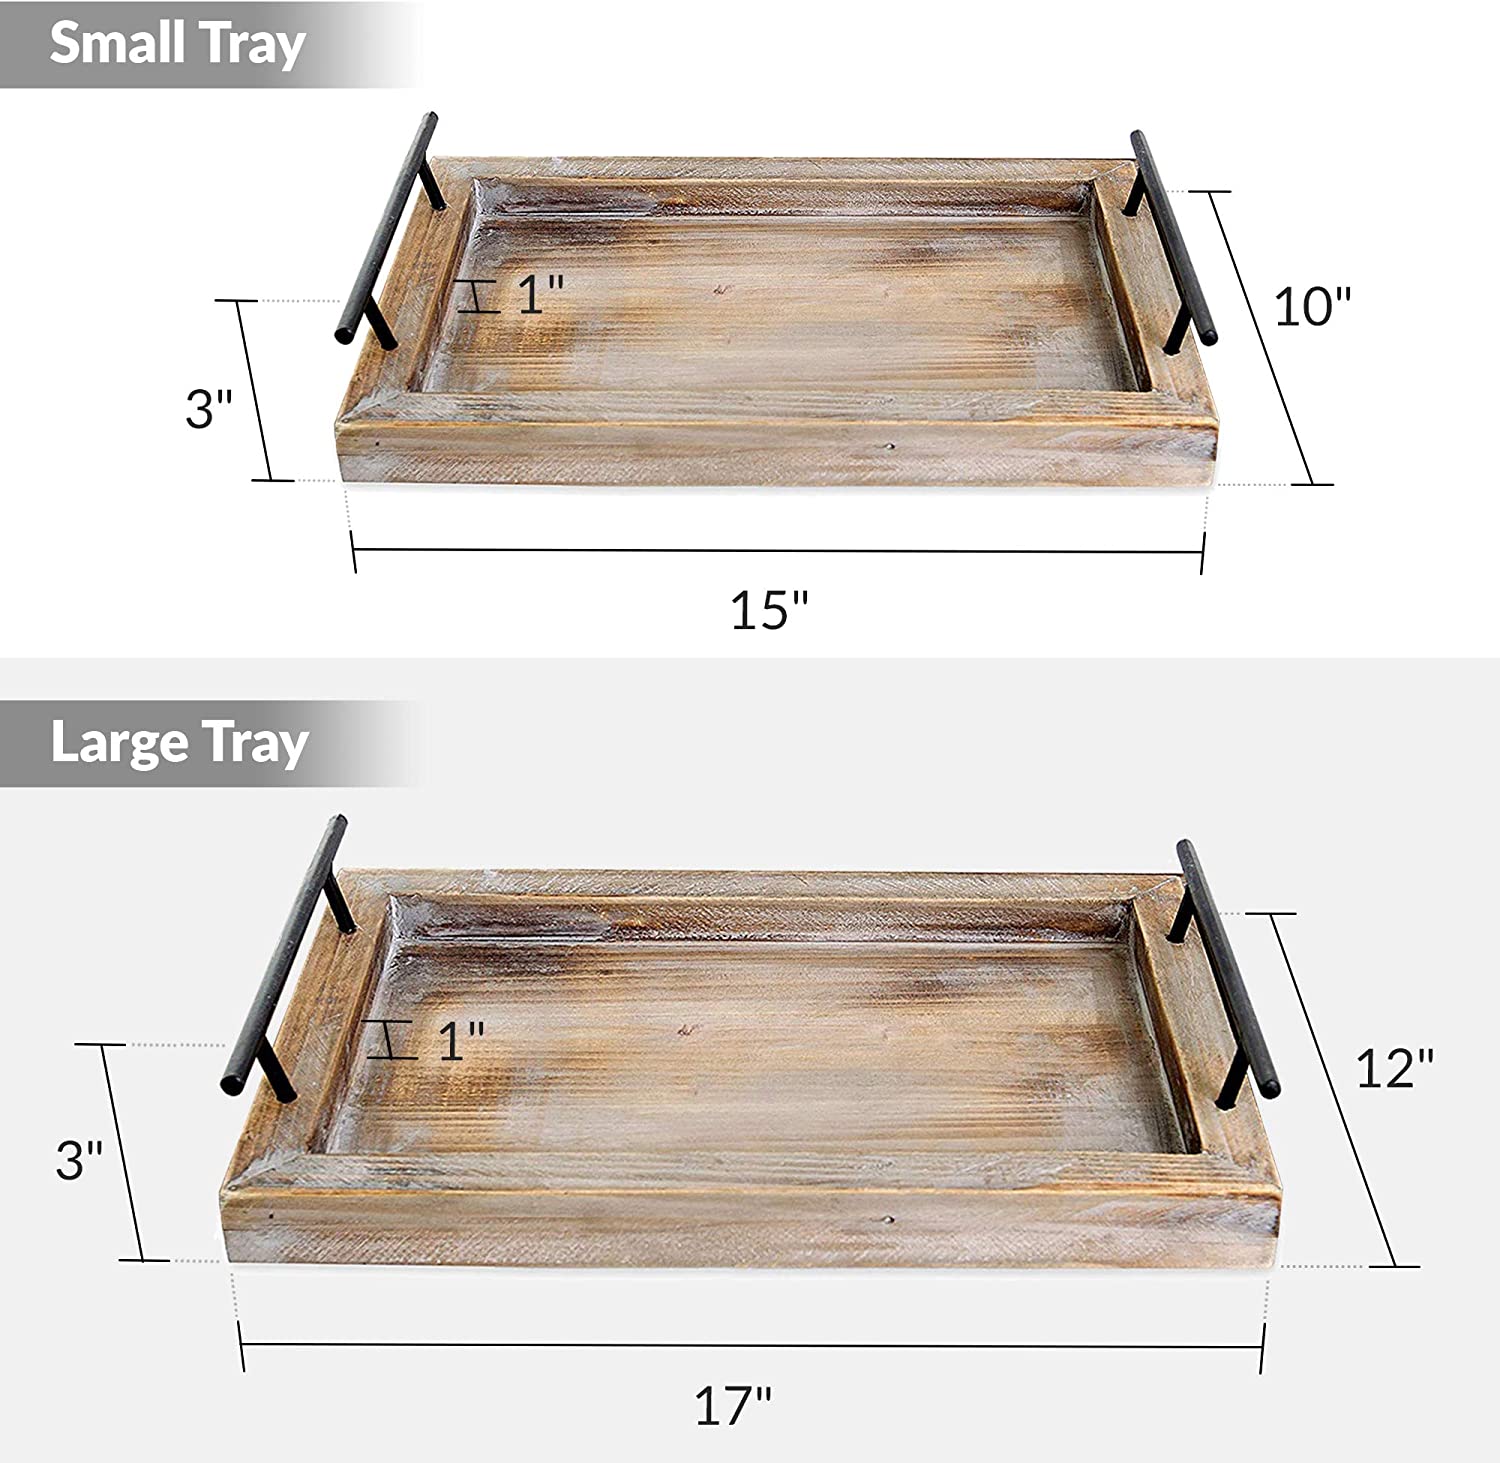 Wooden Serving Trays with Handles (2 Pc. Set) Rustic Color